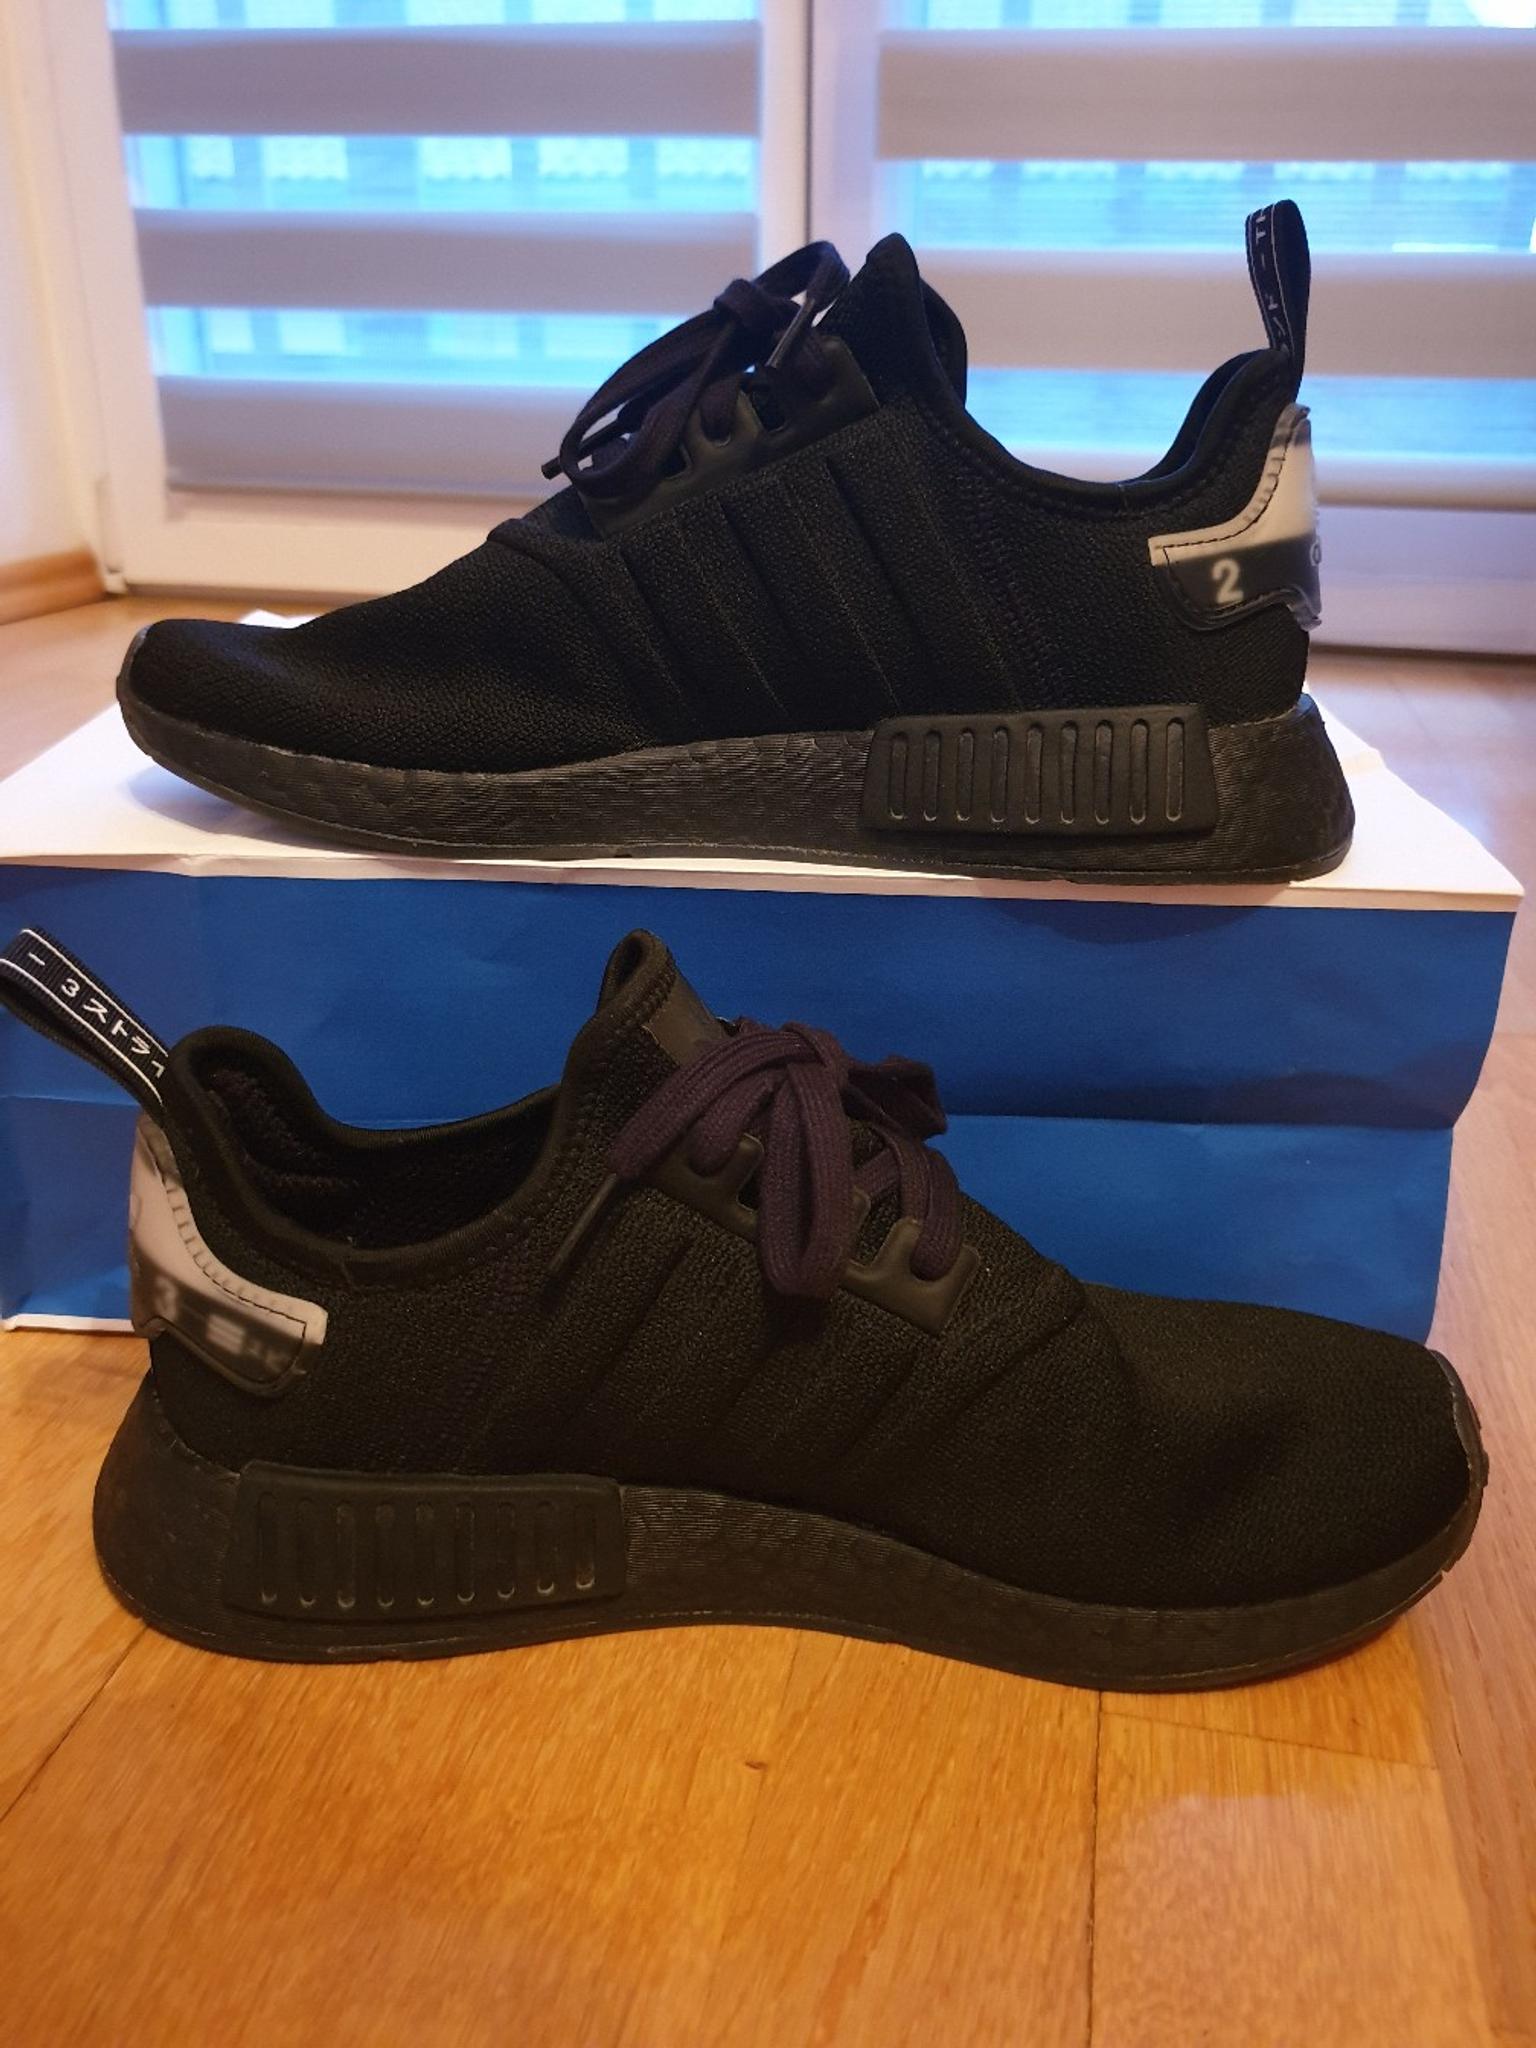 nmd r1 molded stripes